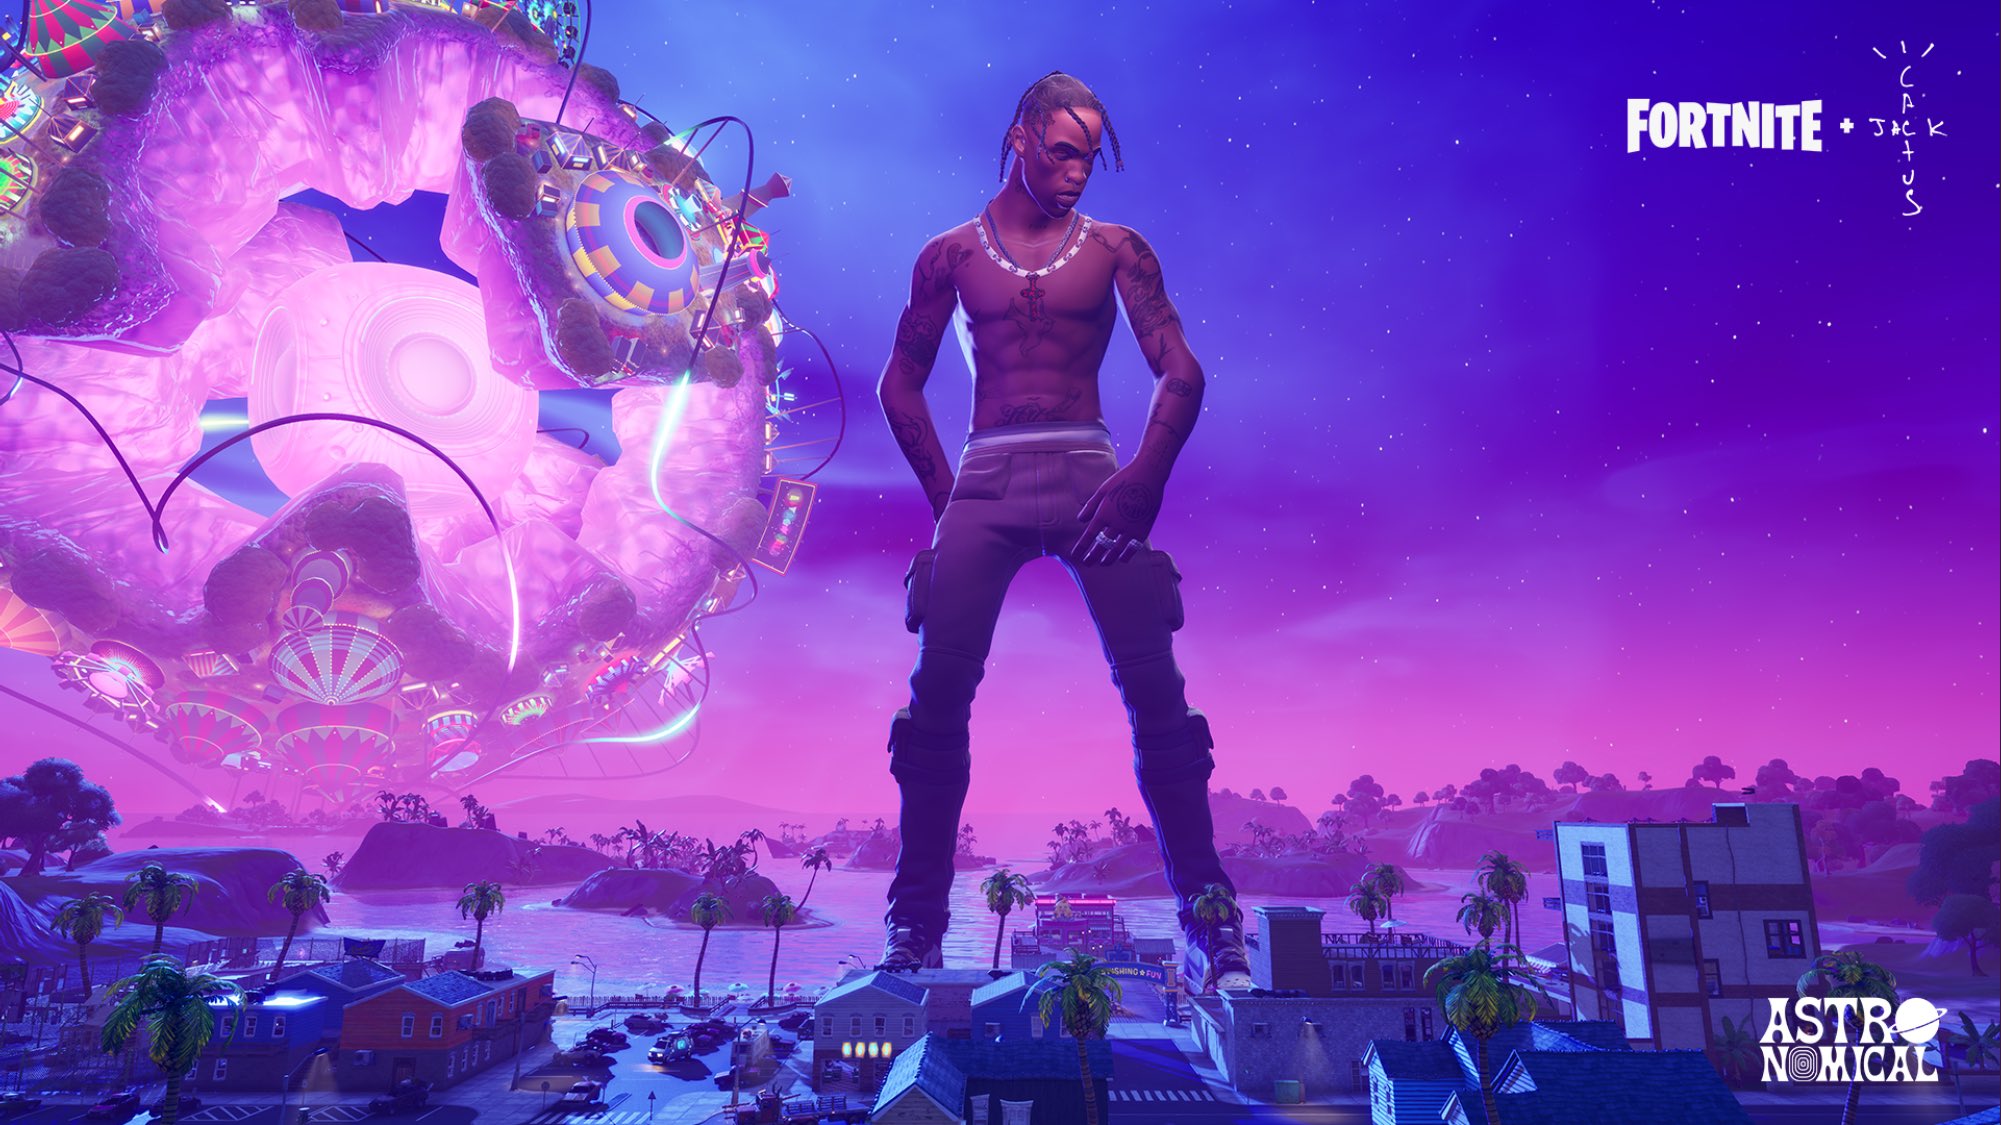 5 Fortnite players to watch out for in 2020